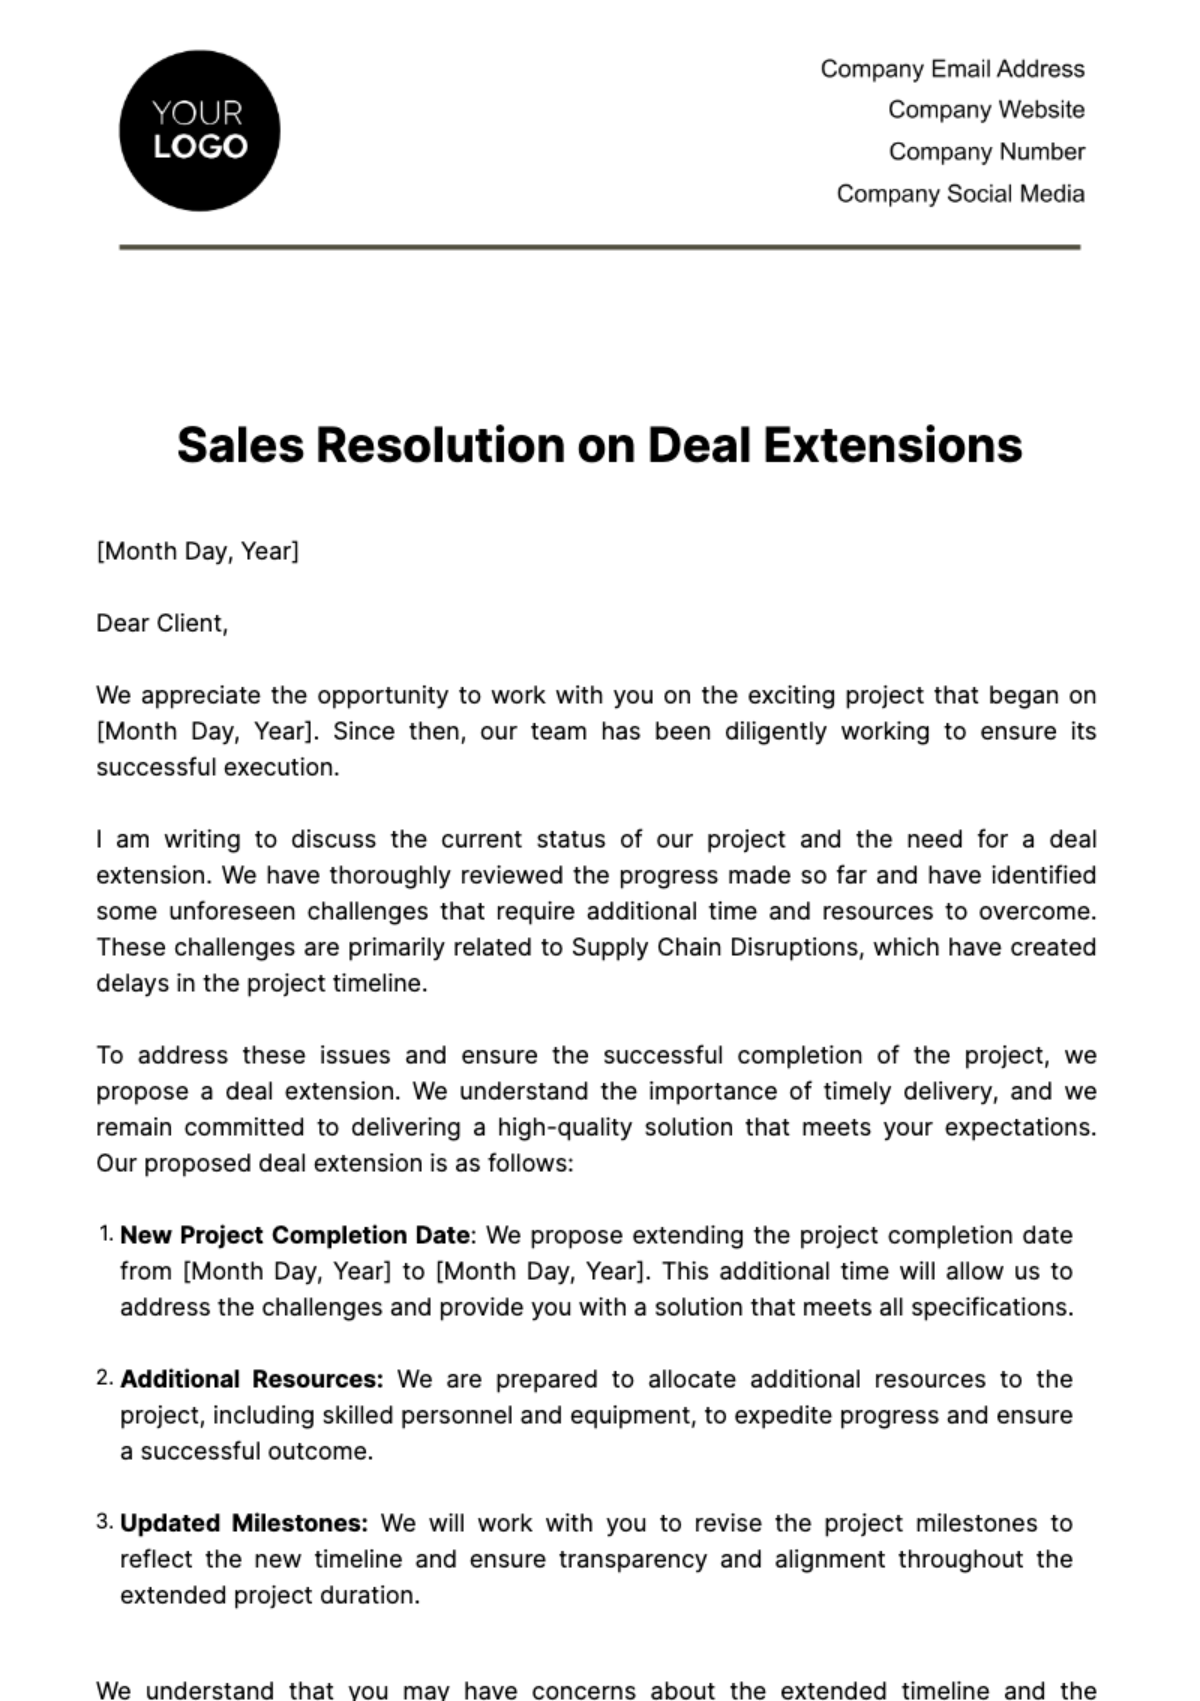 Sales Resolution on Deal Extensions Template